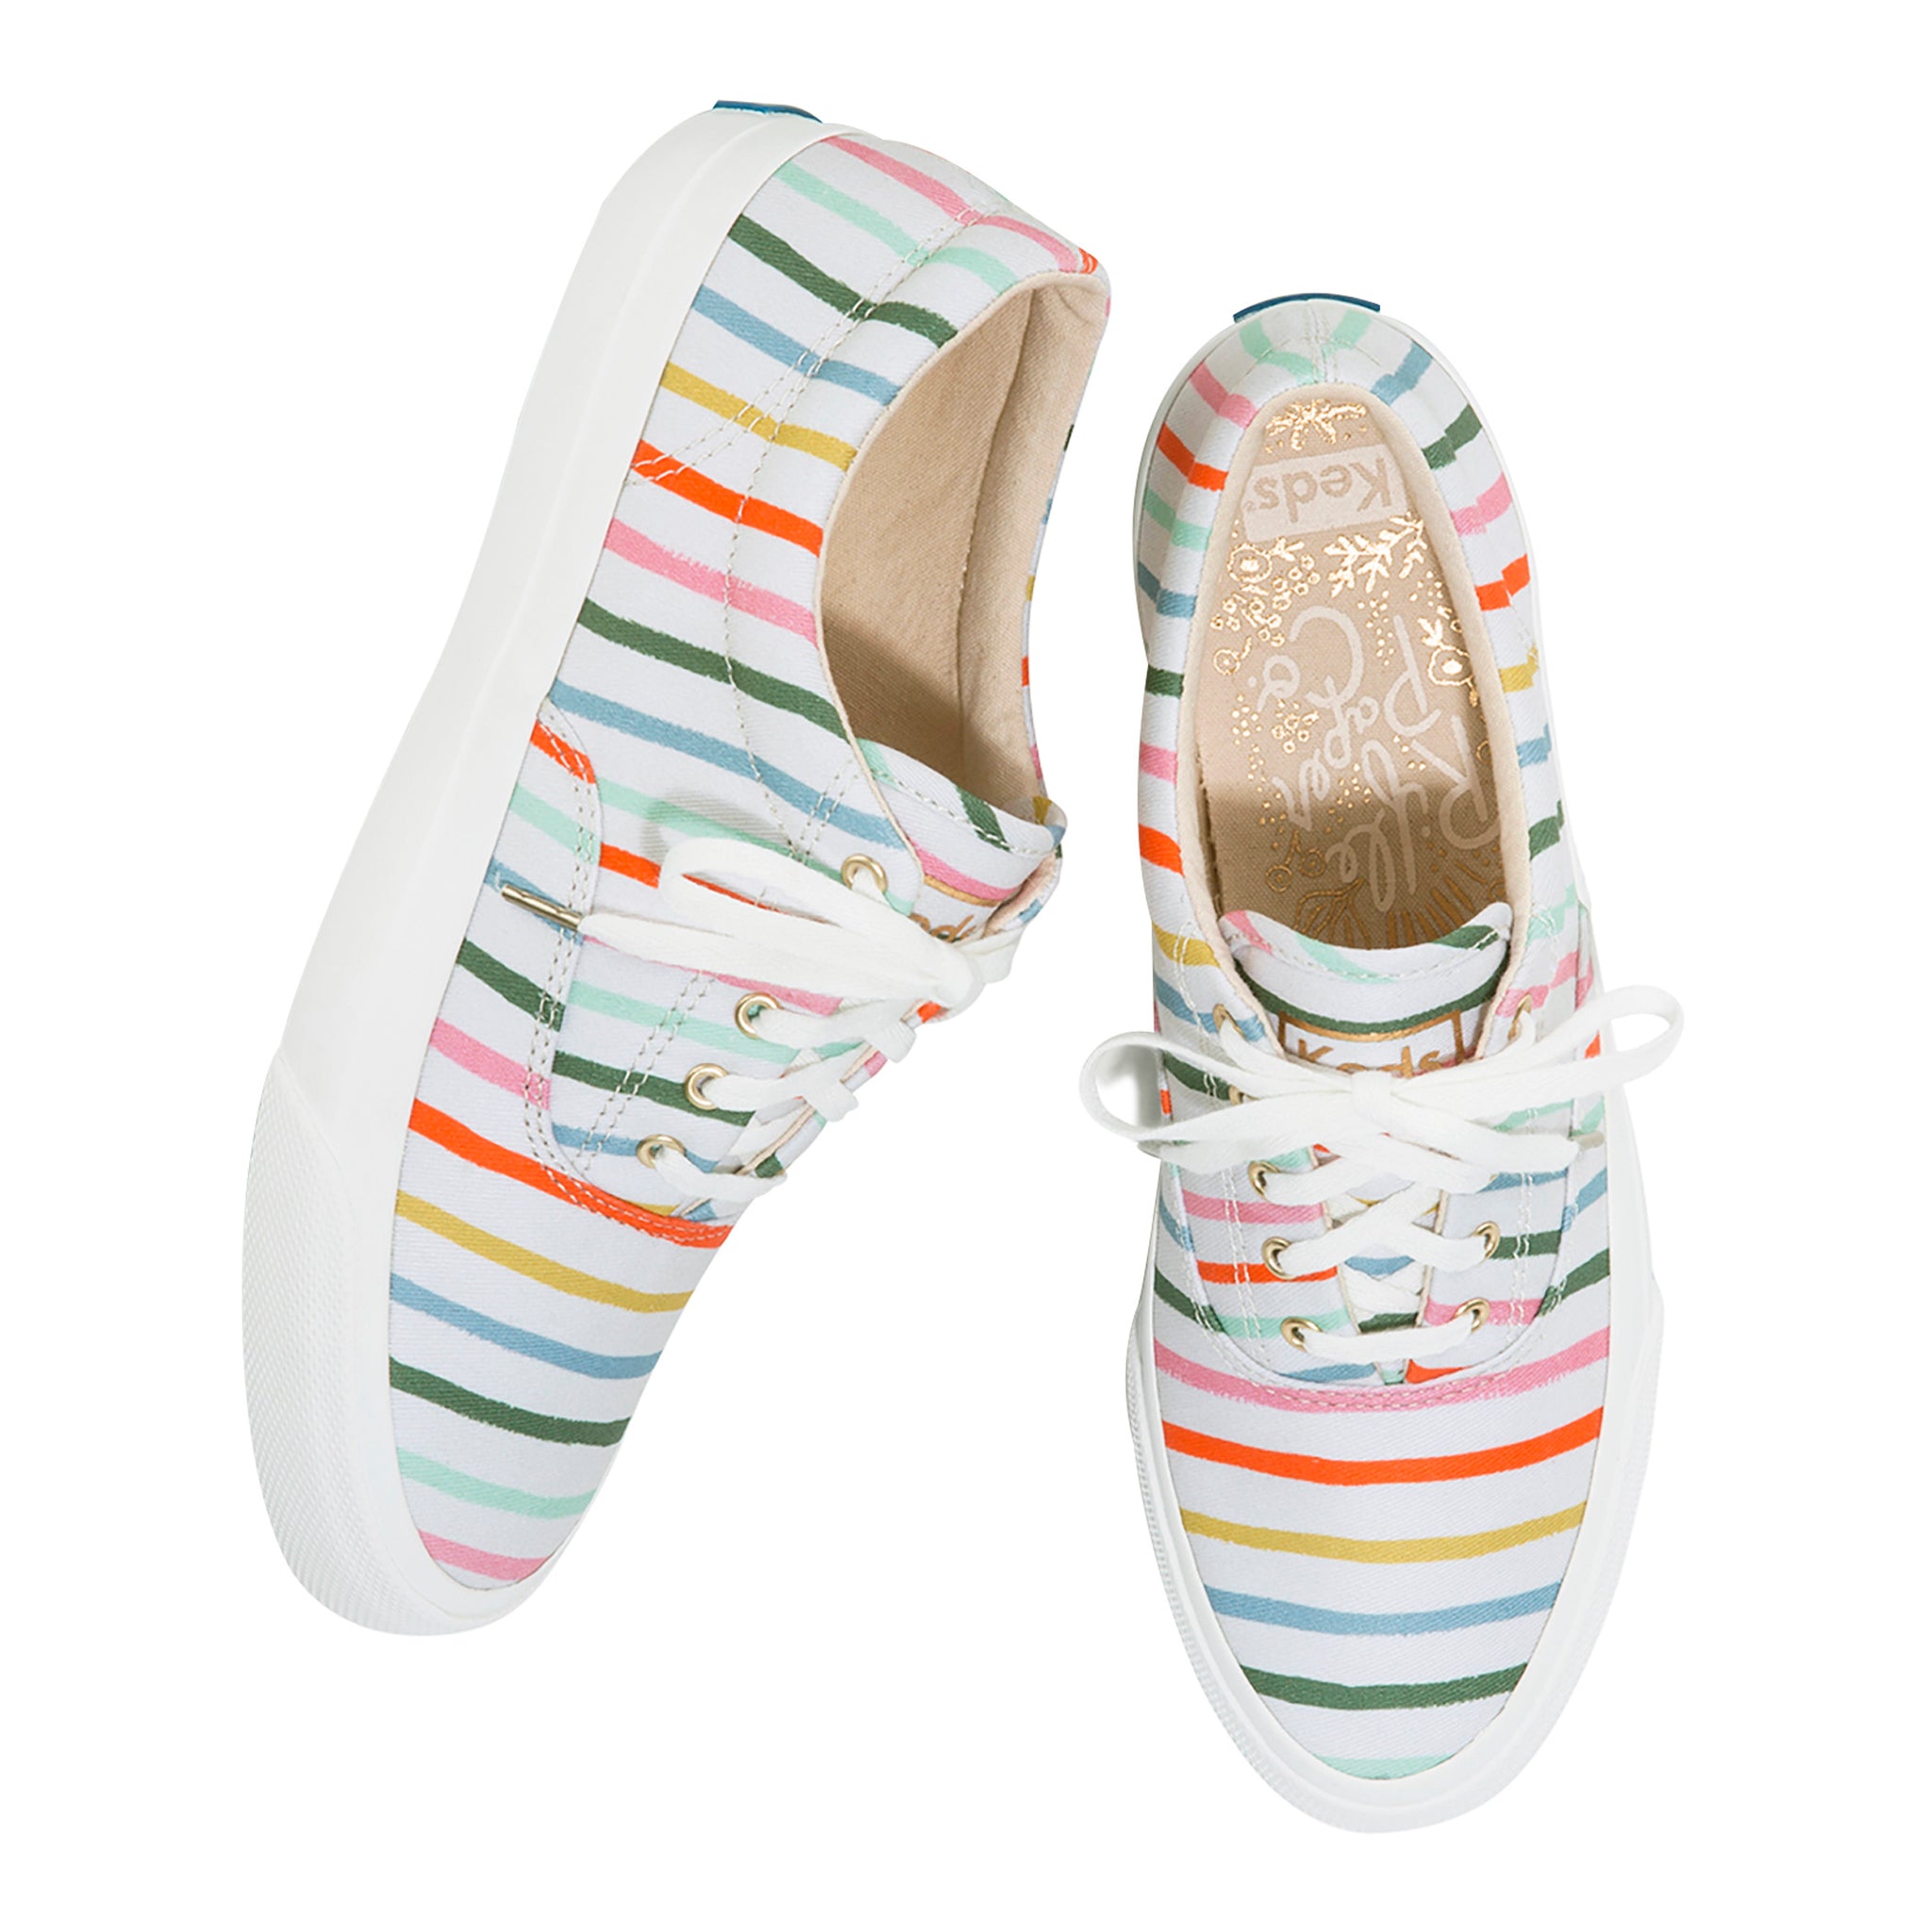 Tenis Anchor Rp Happy St Textil Multicolor Para Mujer